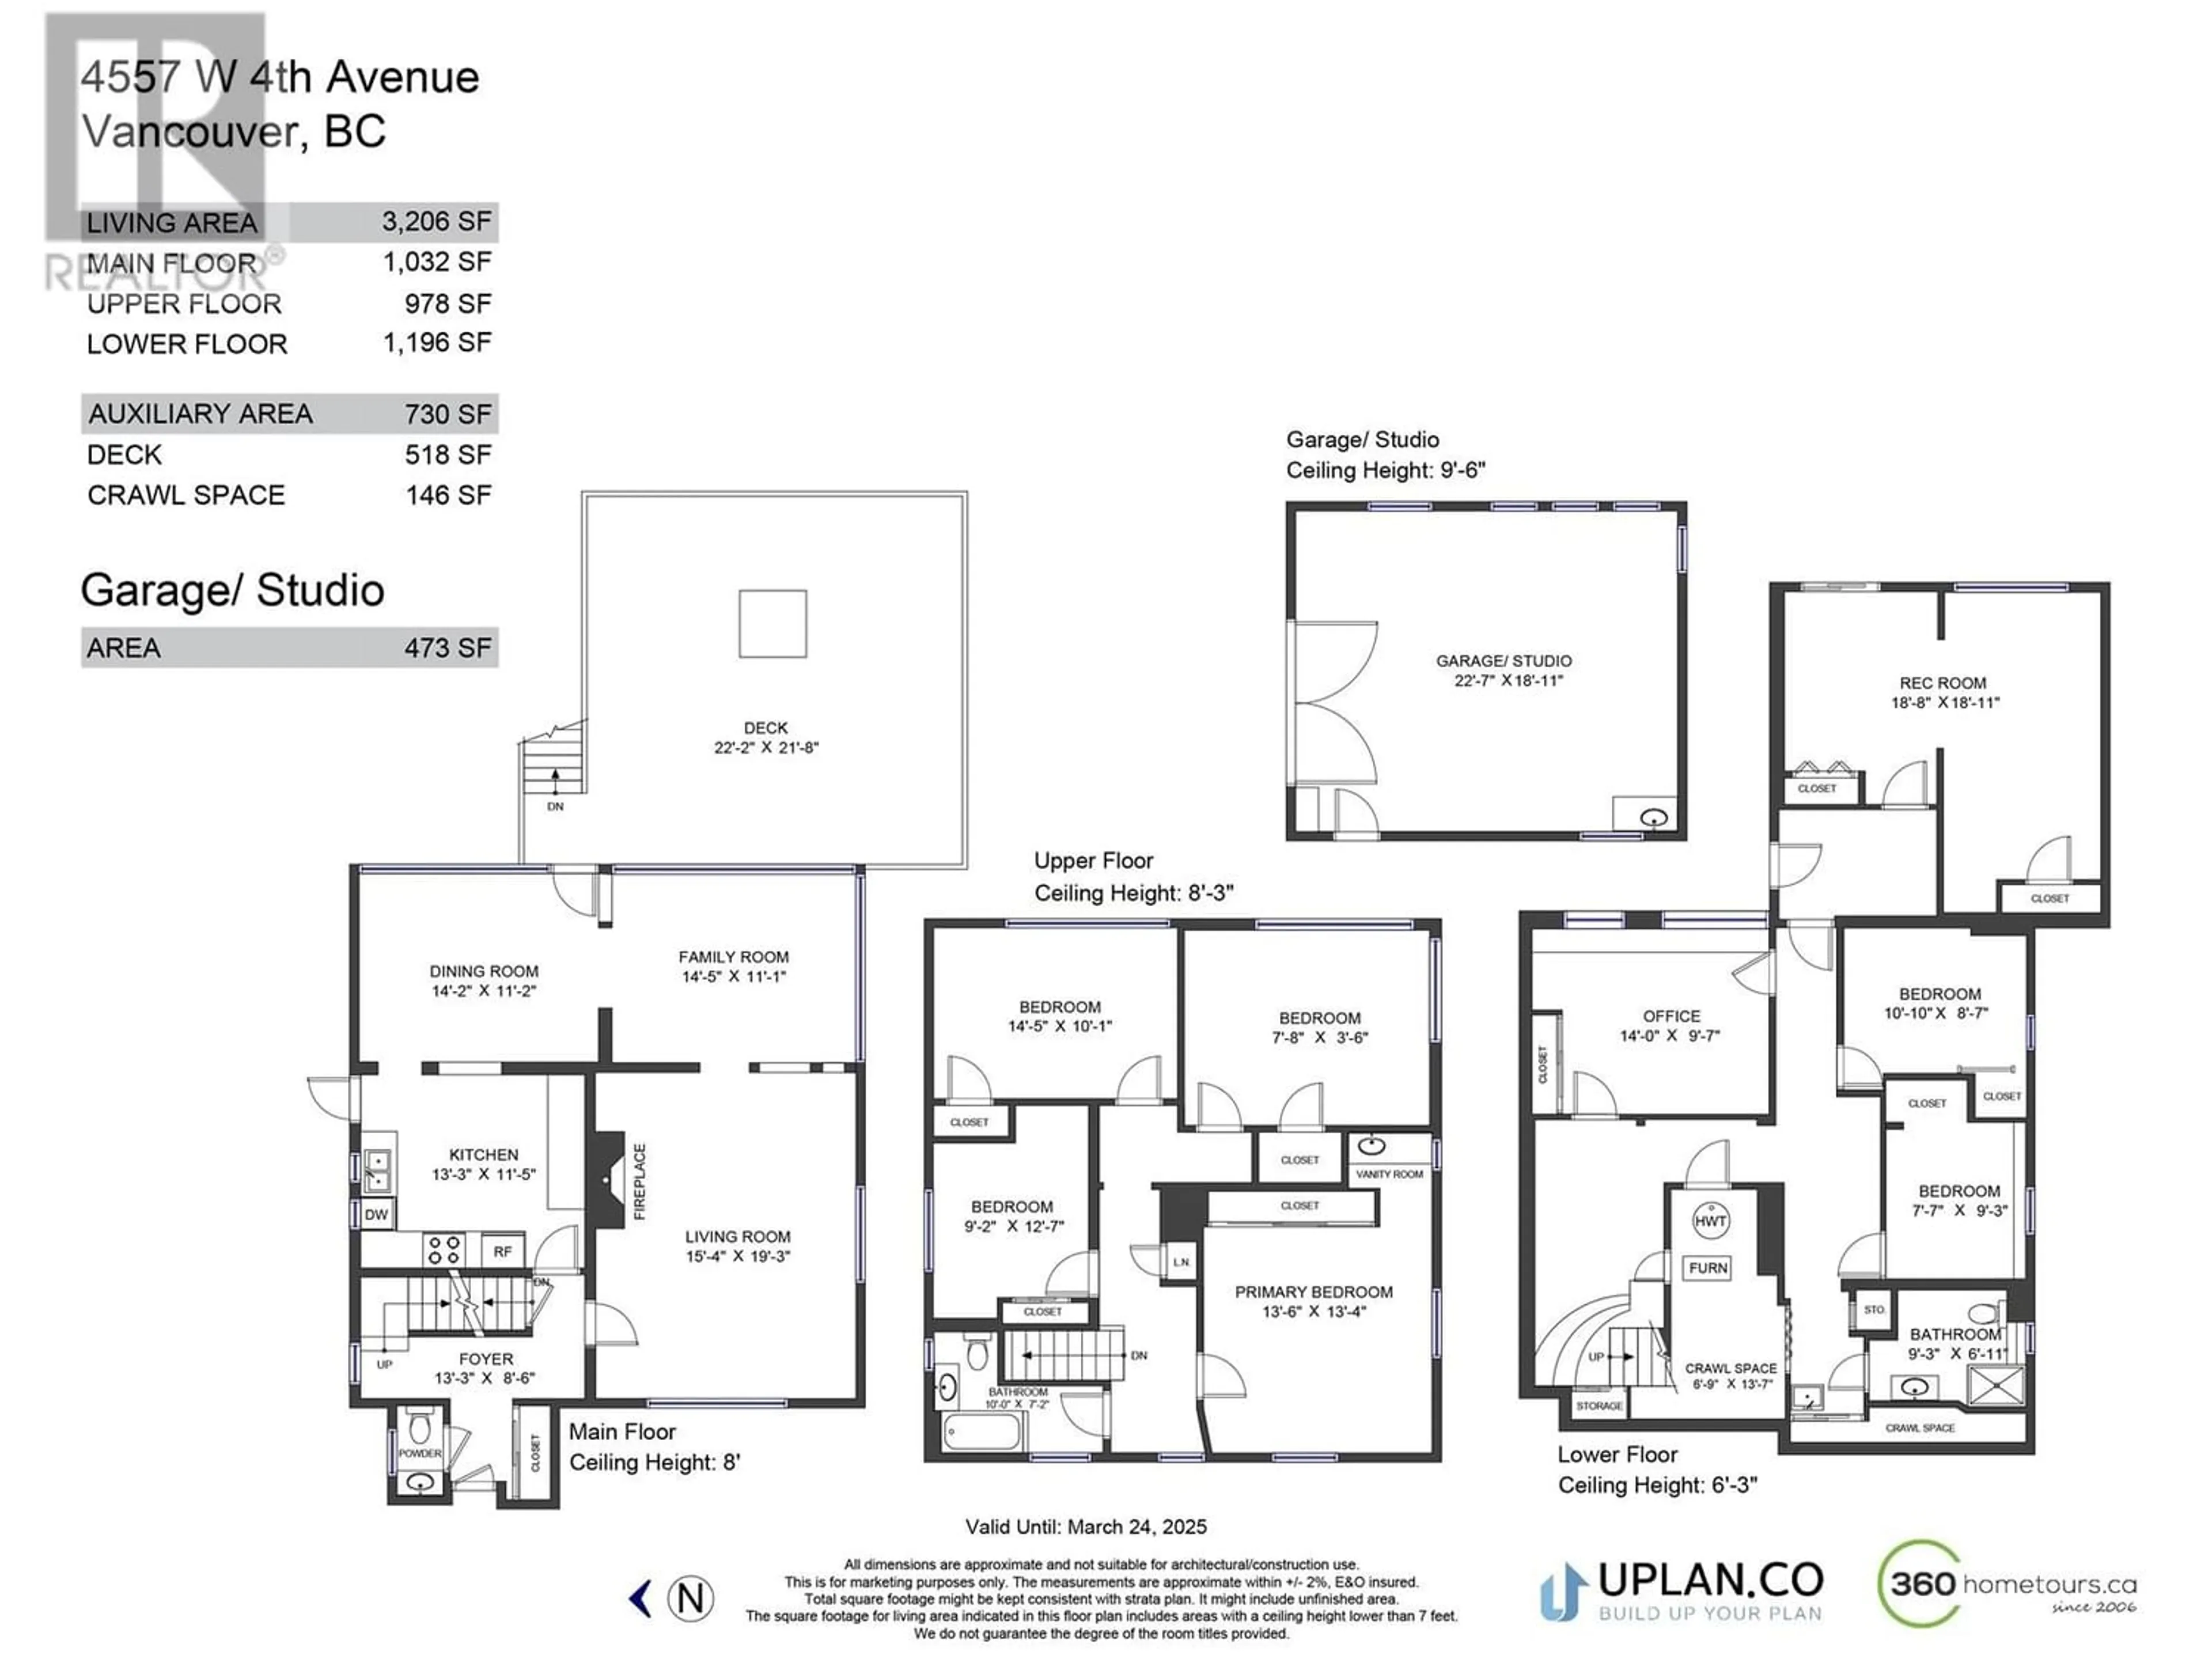 Floor plan for 4557 W 4TH AVENUE, Vancouver British Columbia V6R1R4